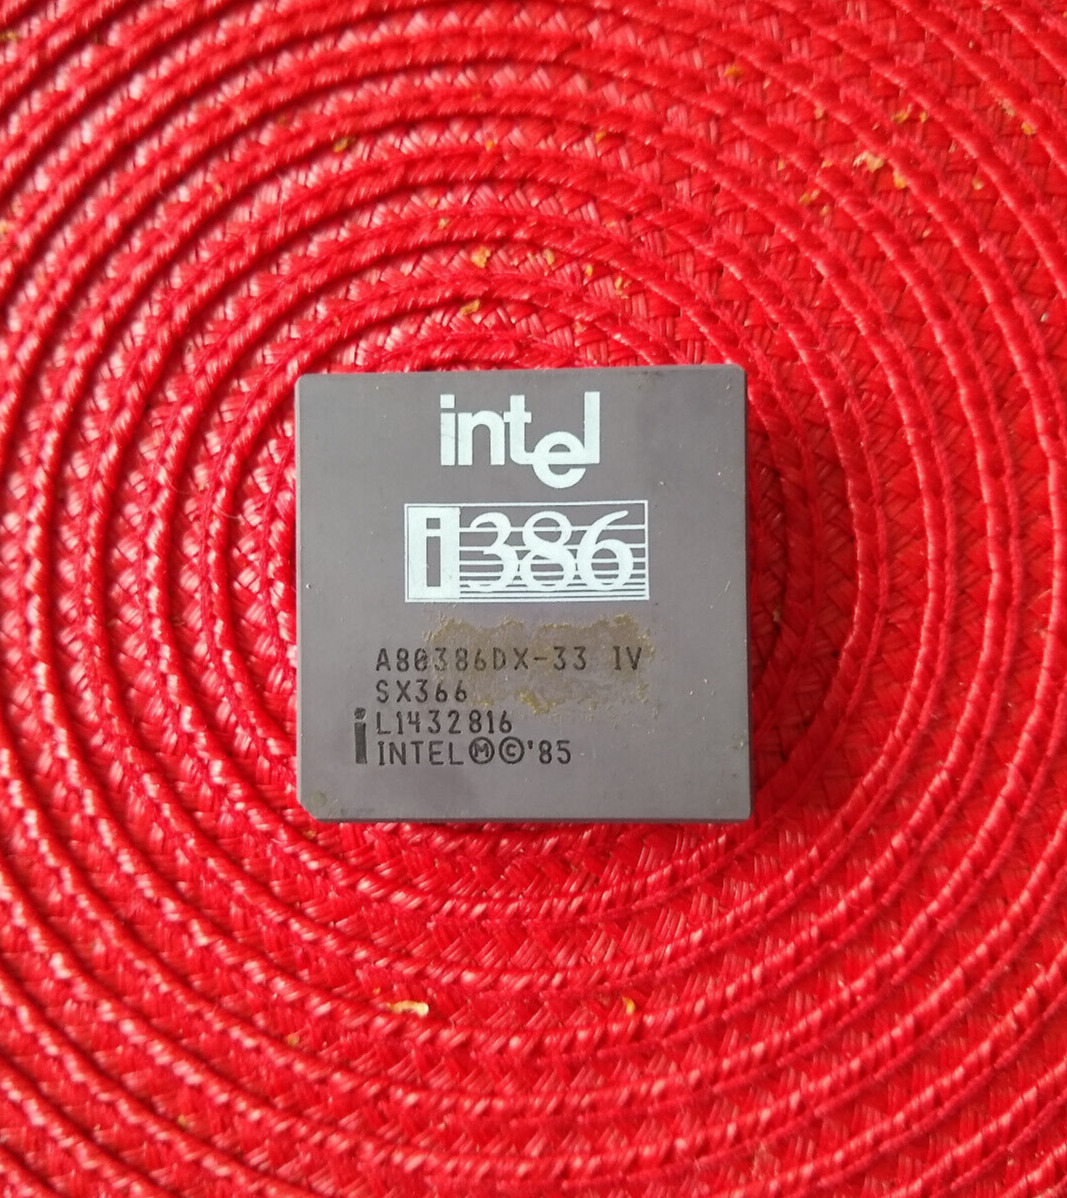 Intel 386DX-33  A80386DX 33 MHz i386 DX SX366 Ceramic  ✅ Very Rare Collectible